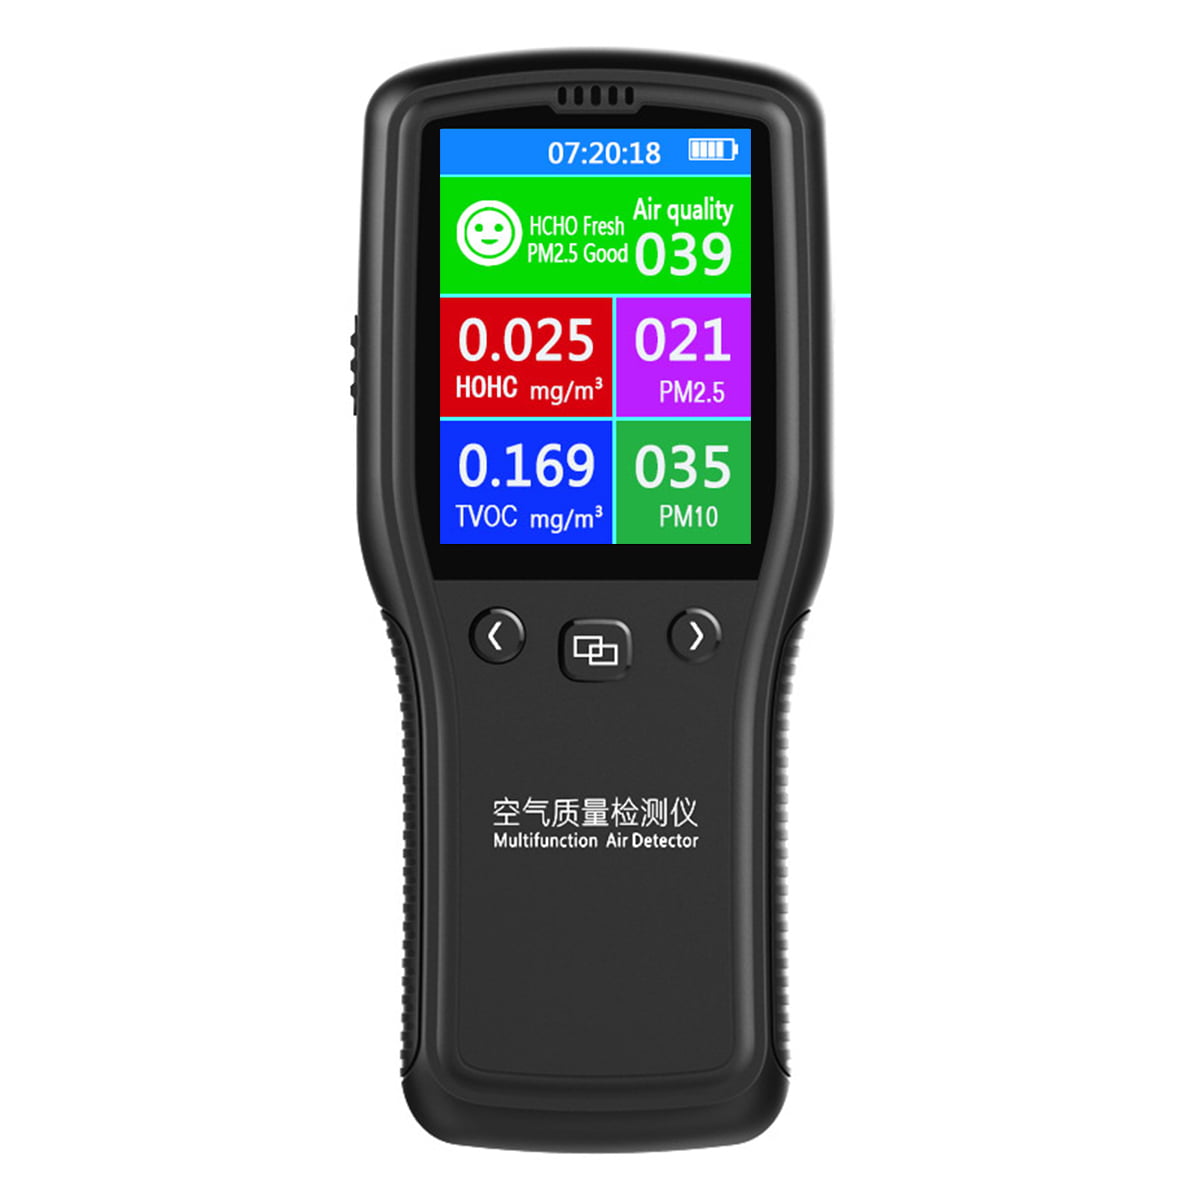 Air Quality Tester for Home Offices High Capacity 2600 mAh Battery Portable Indoor Air Quality Monitor for PM2.5 Detector Real-time Display Air Quality Detector Highly Accurate Display